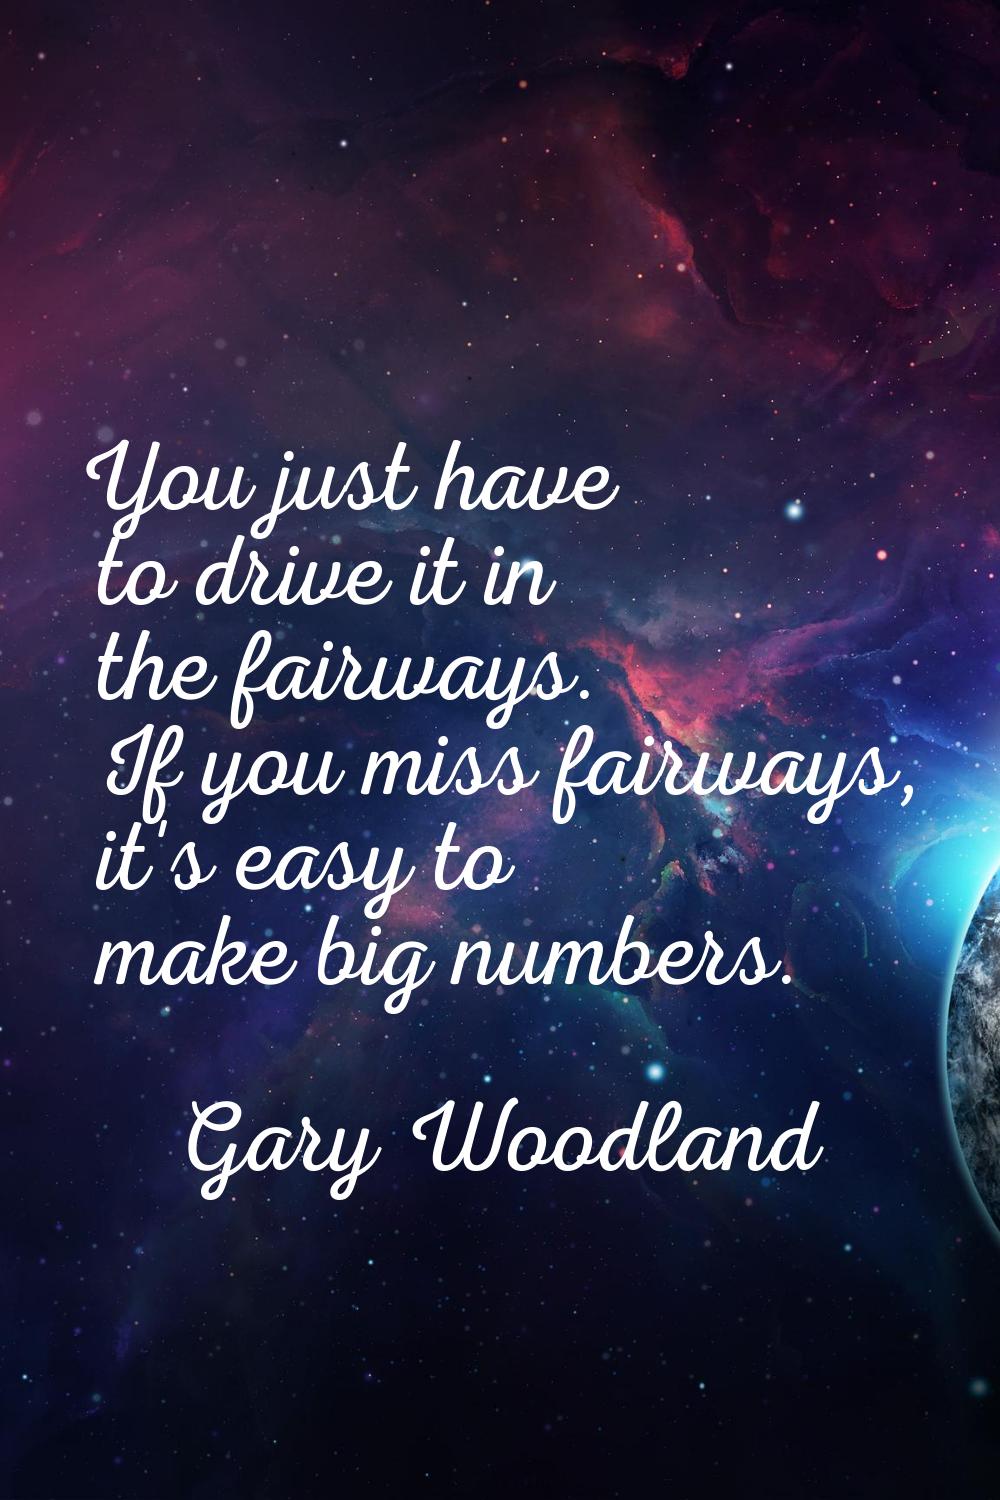 You just have to drive it in the fairways. If you miss fairways, it's easy to make big numbers.